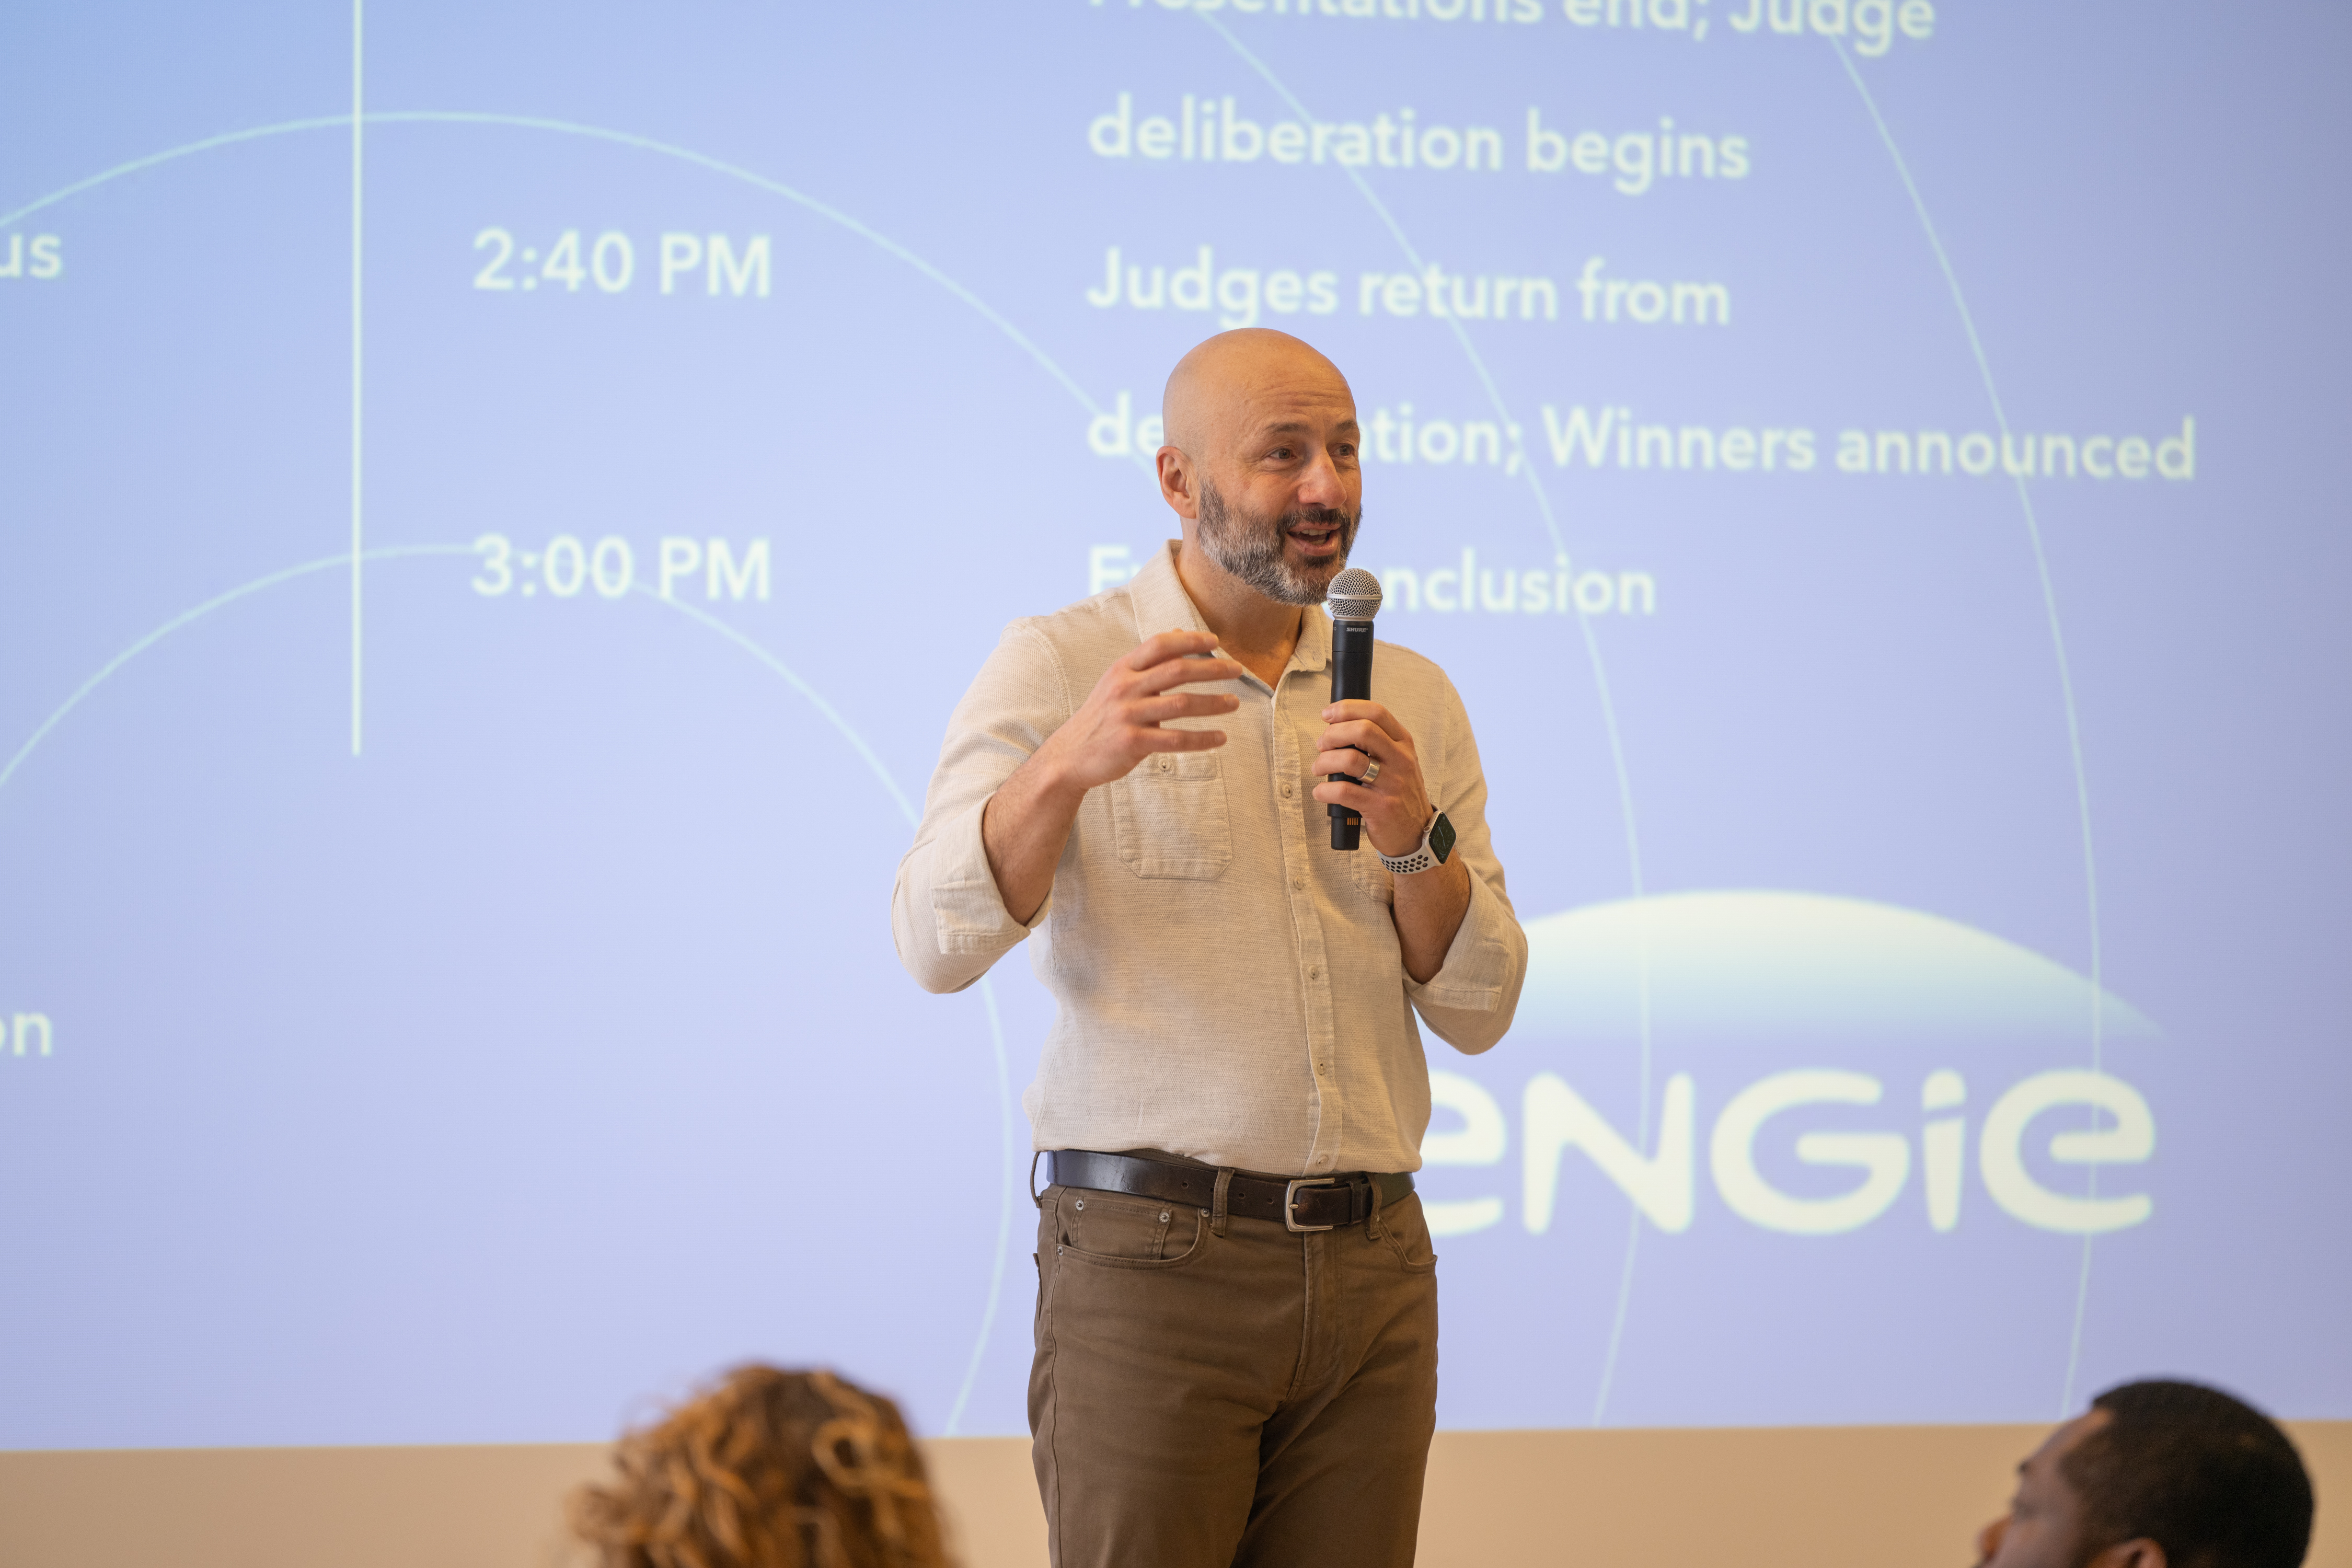 ENGIE Vice President of Major Partnerships Serdar Tufekci welcomes participants, judges, and spectators to the 2024 Smart Campus Challenge Judging Event at the newly built Energy Advancement and Innovation Center.